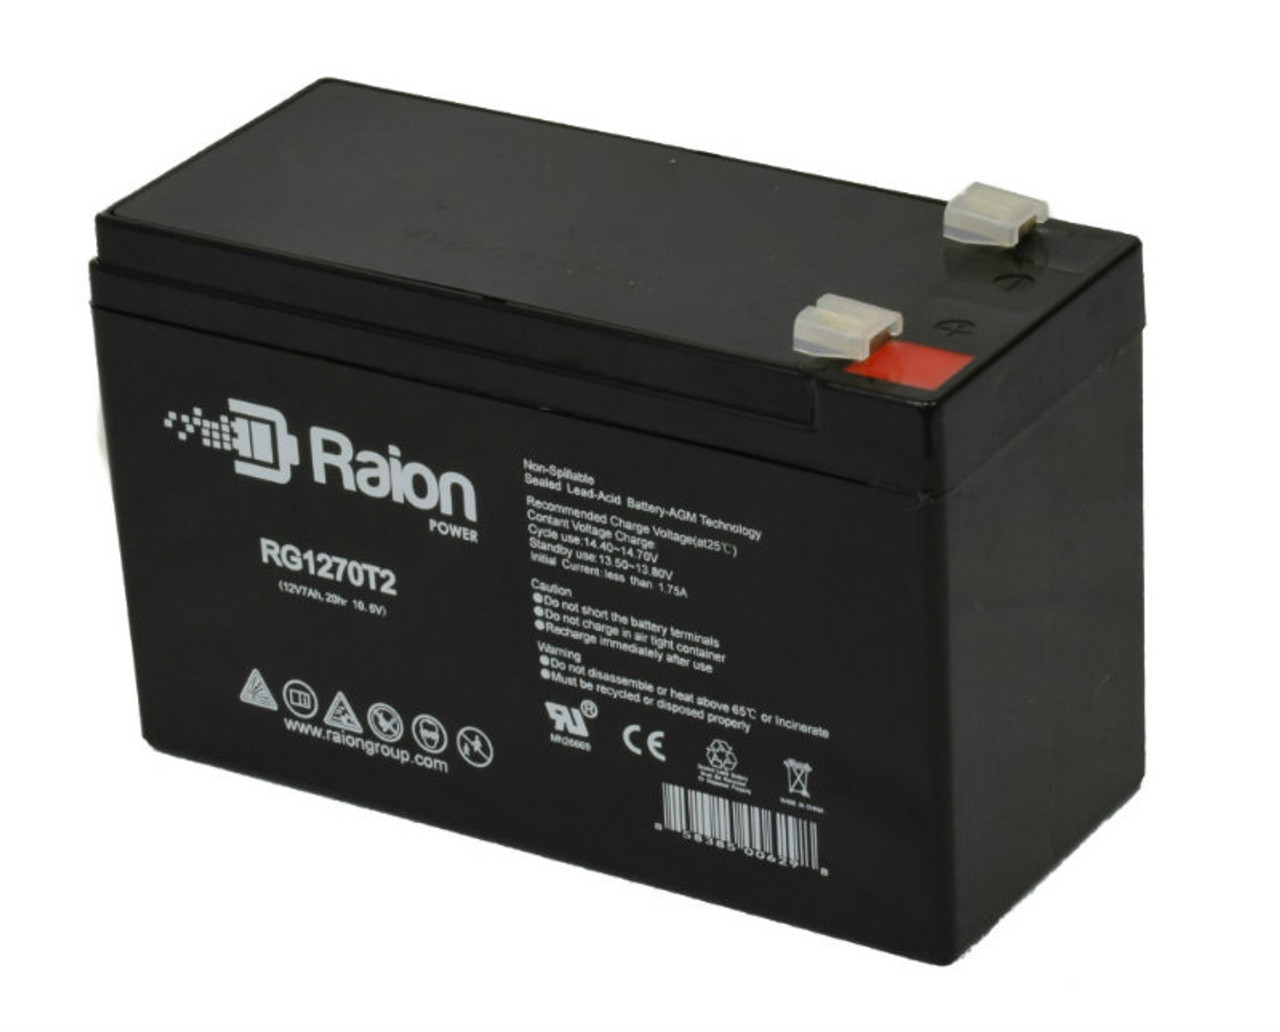 Raion Power Replacement 12V 7Ah Fire Alarm Control Panel Battery for ADI 25310 - 1 Pack